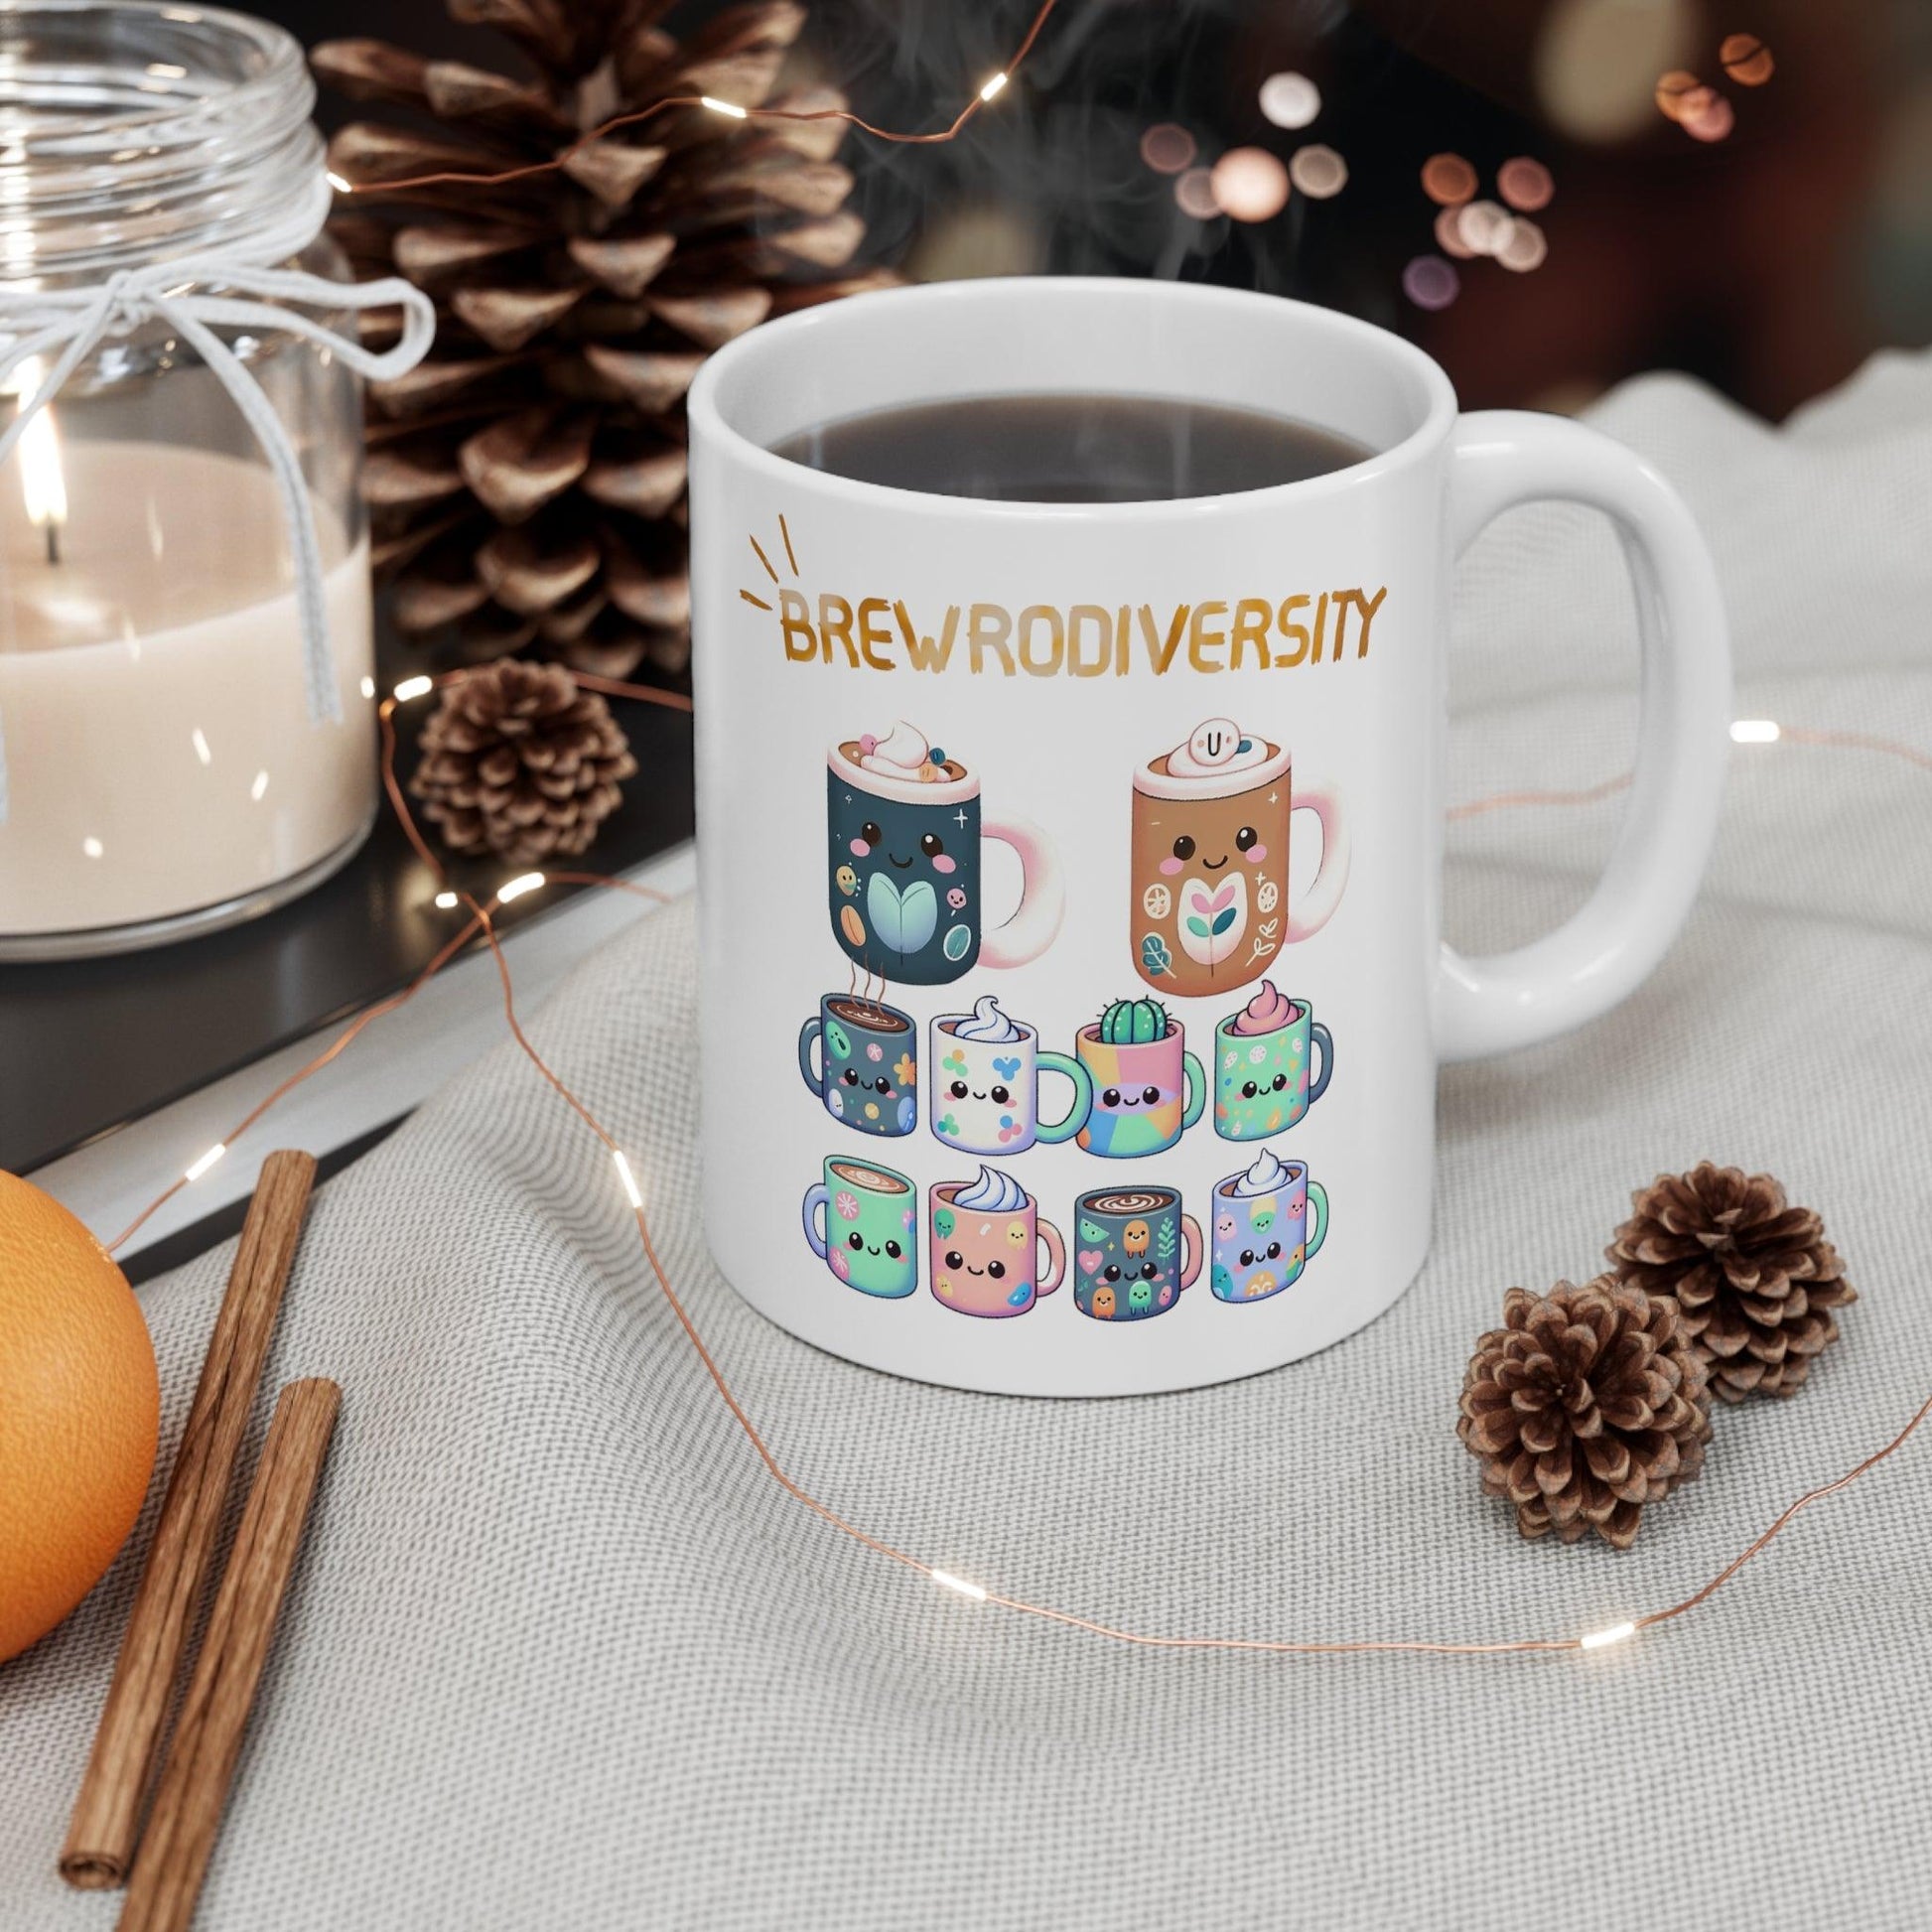 Neurodiversity Coffee Mug - 'Brewrodiversity' Cup for Inclusive Mornings - Unique Ceramic ADHD gift - Fidget and Focus